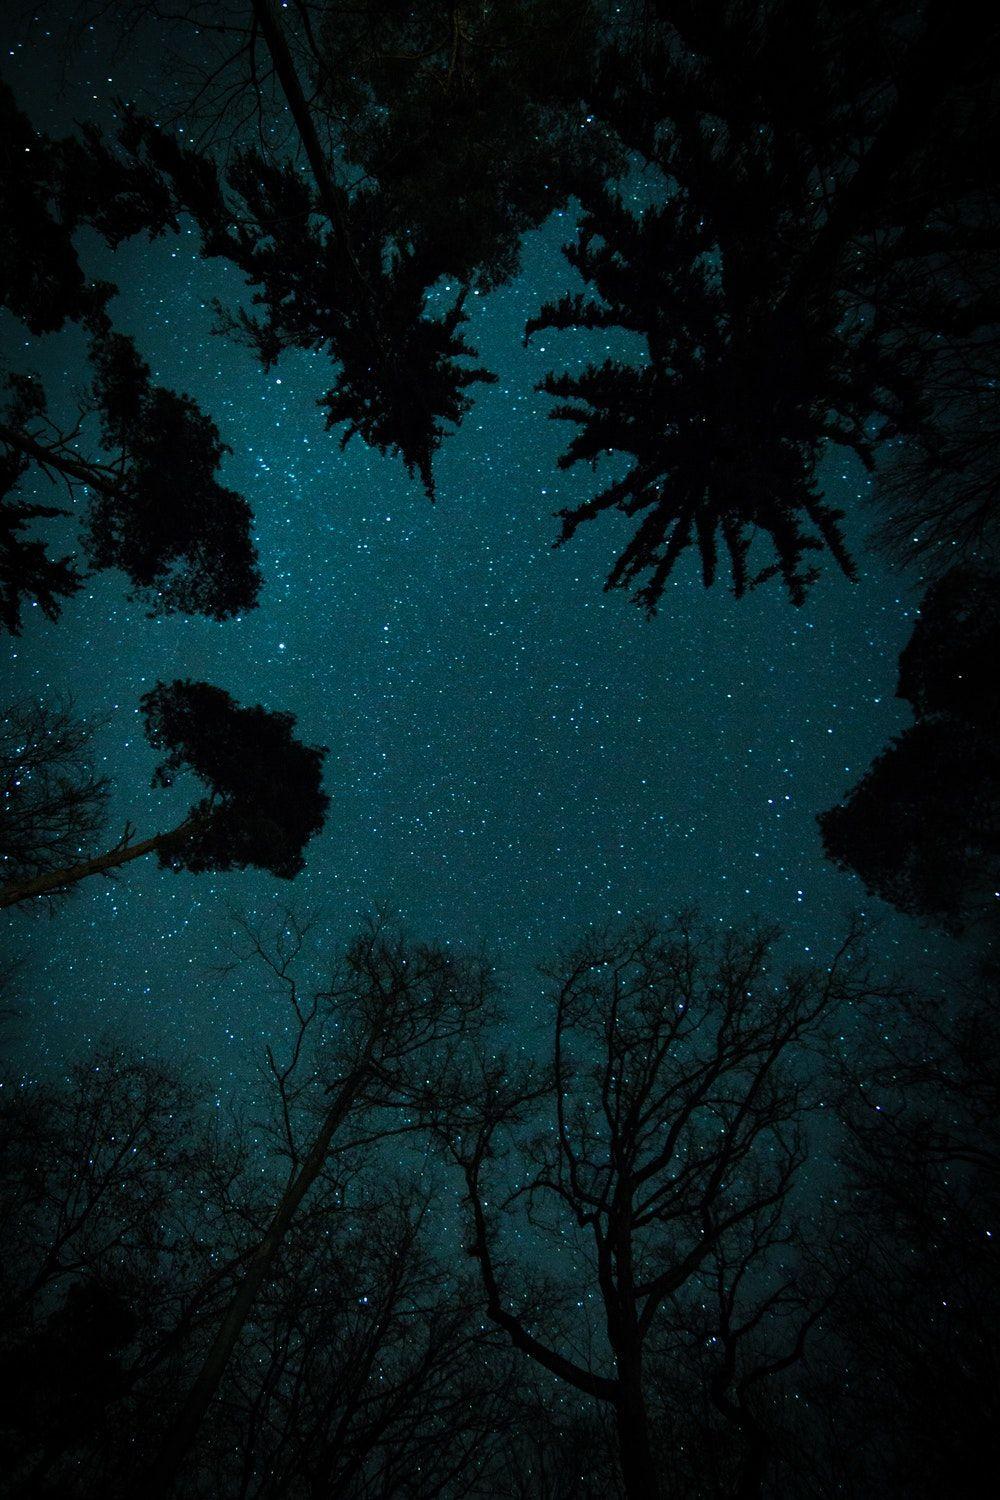 Night Sky Picture. Download Free Image